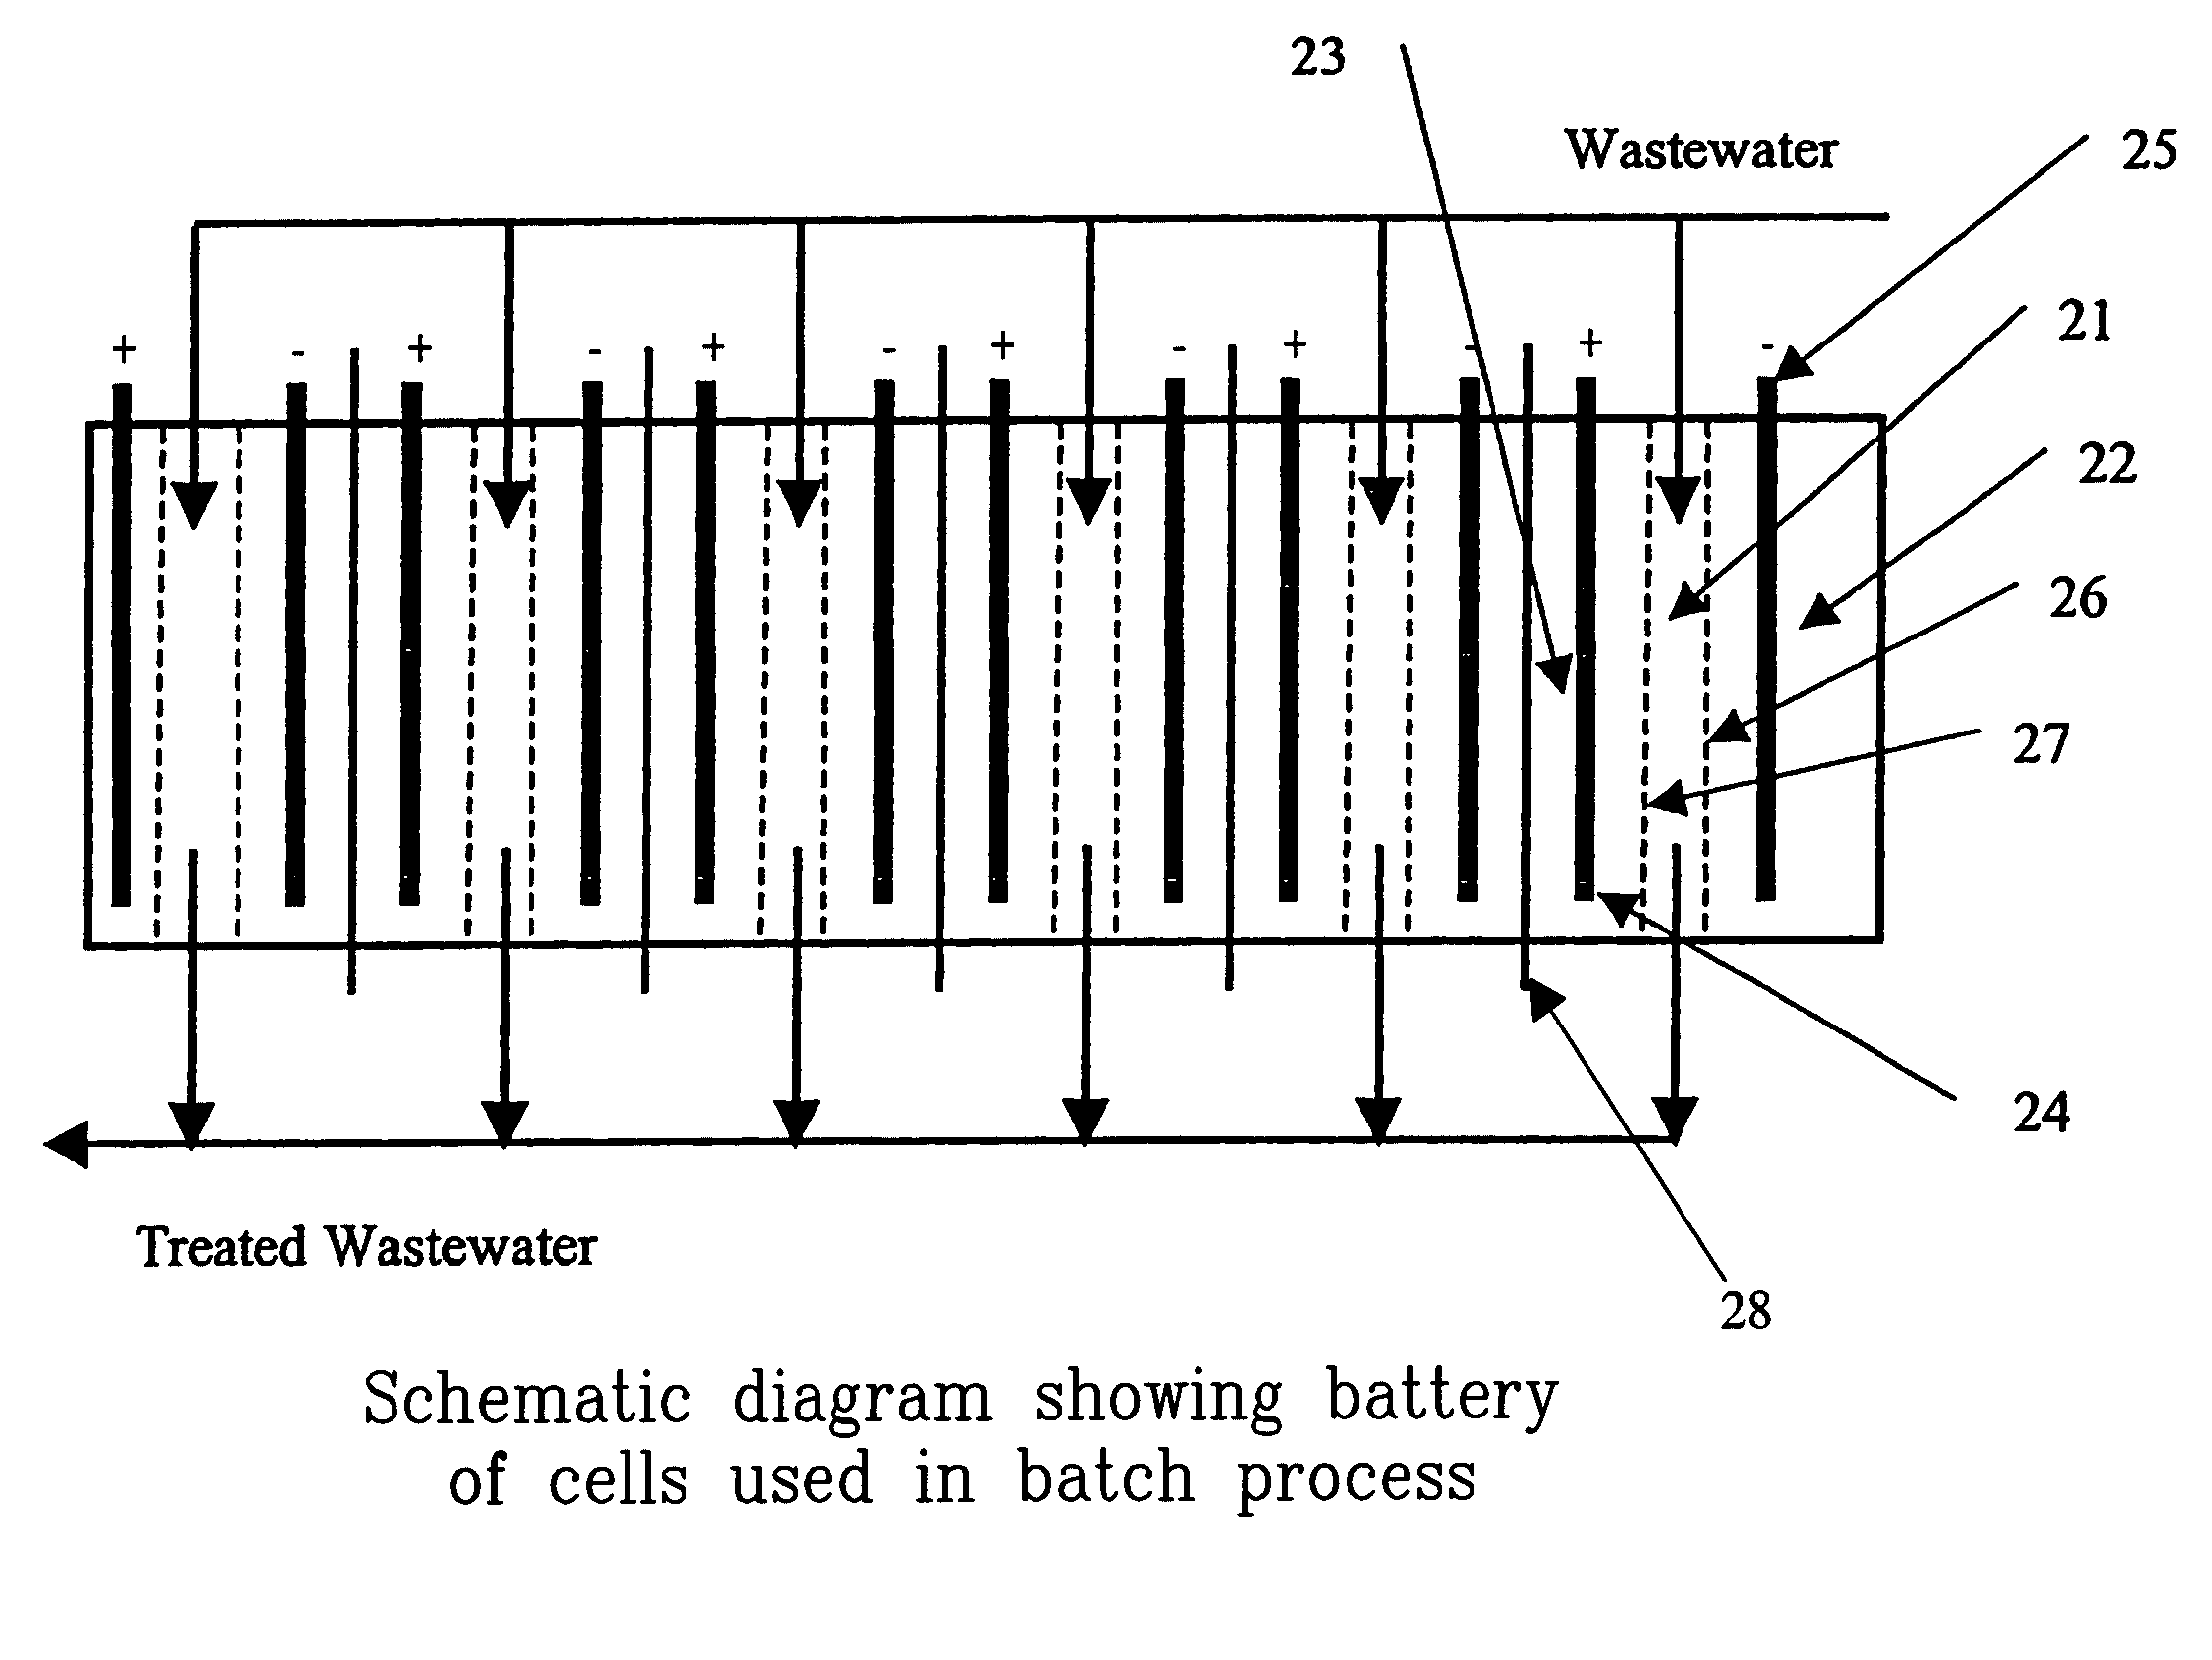 Integrated electrolytic-electrodialytic apparatus and process for recovering metals from metal ion-containing waste streams